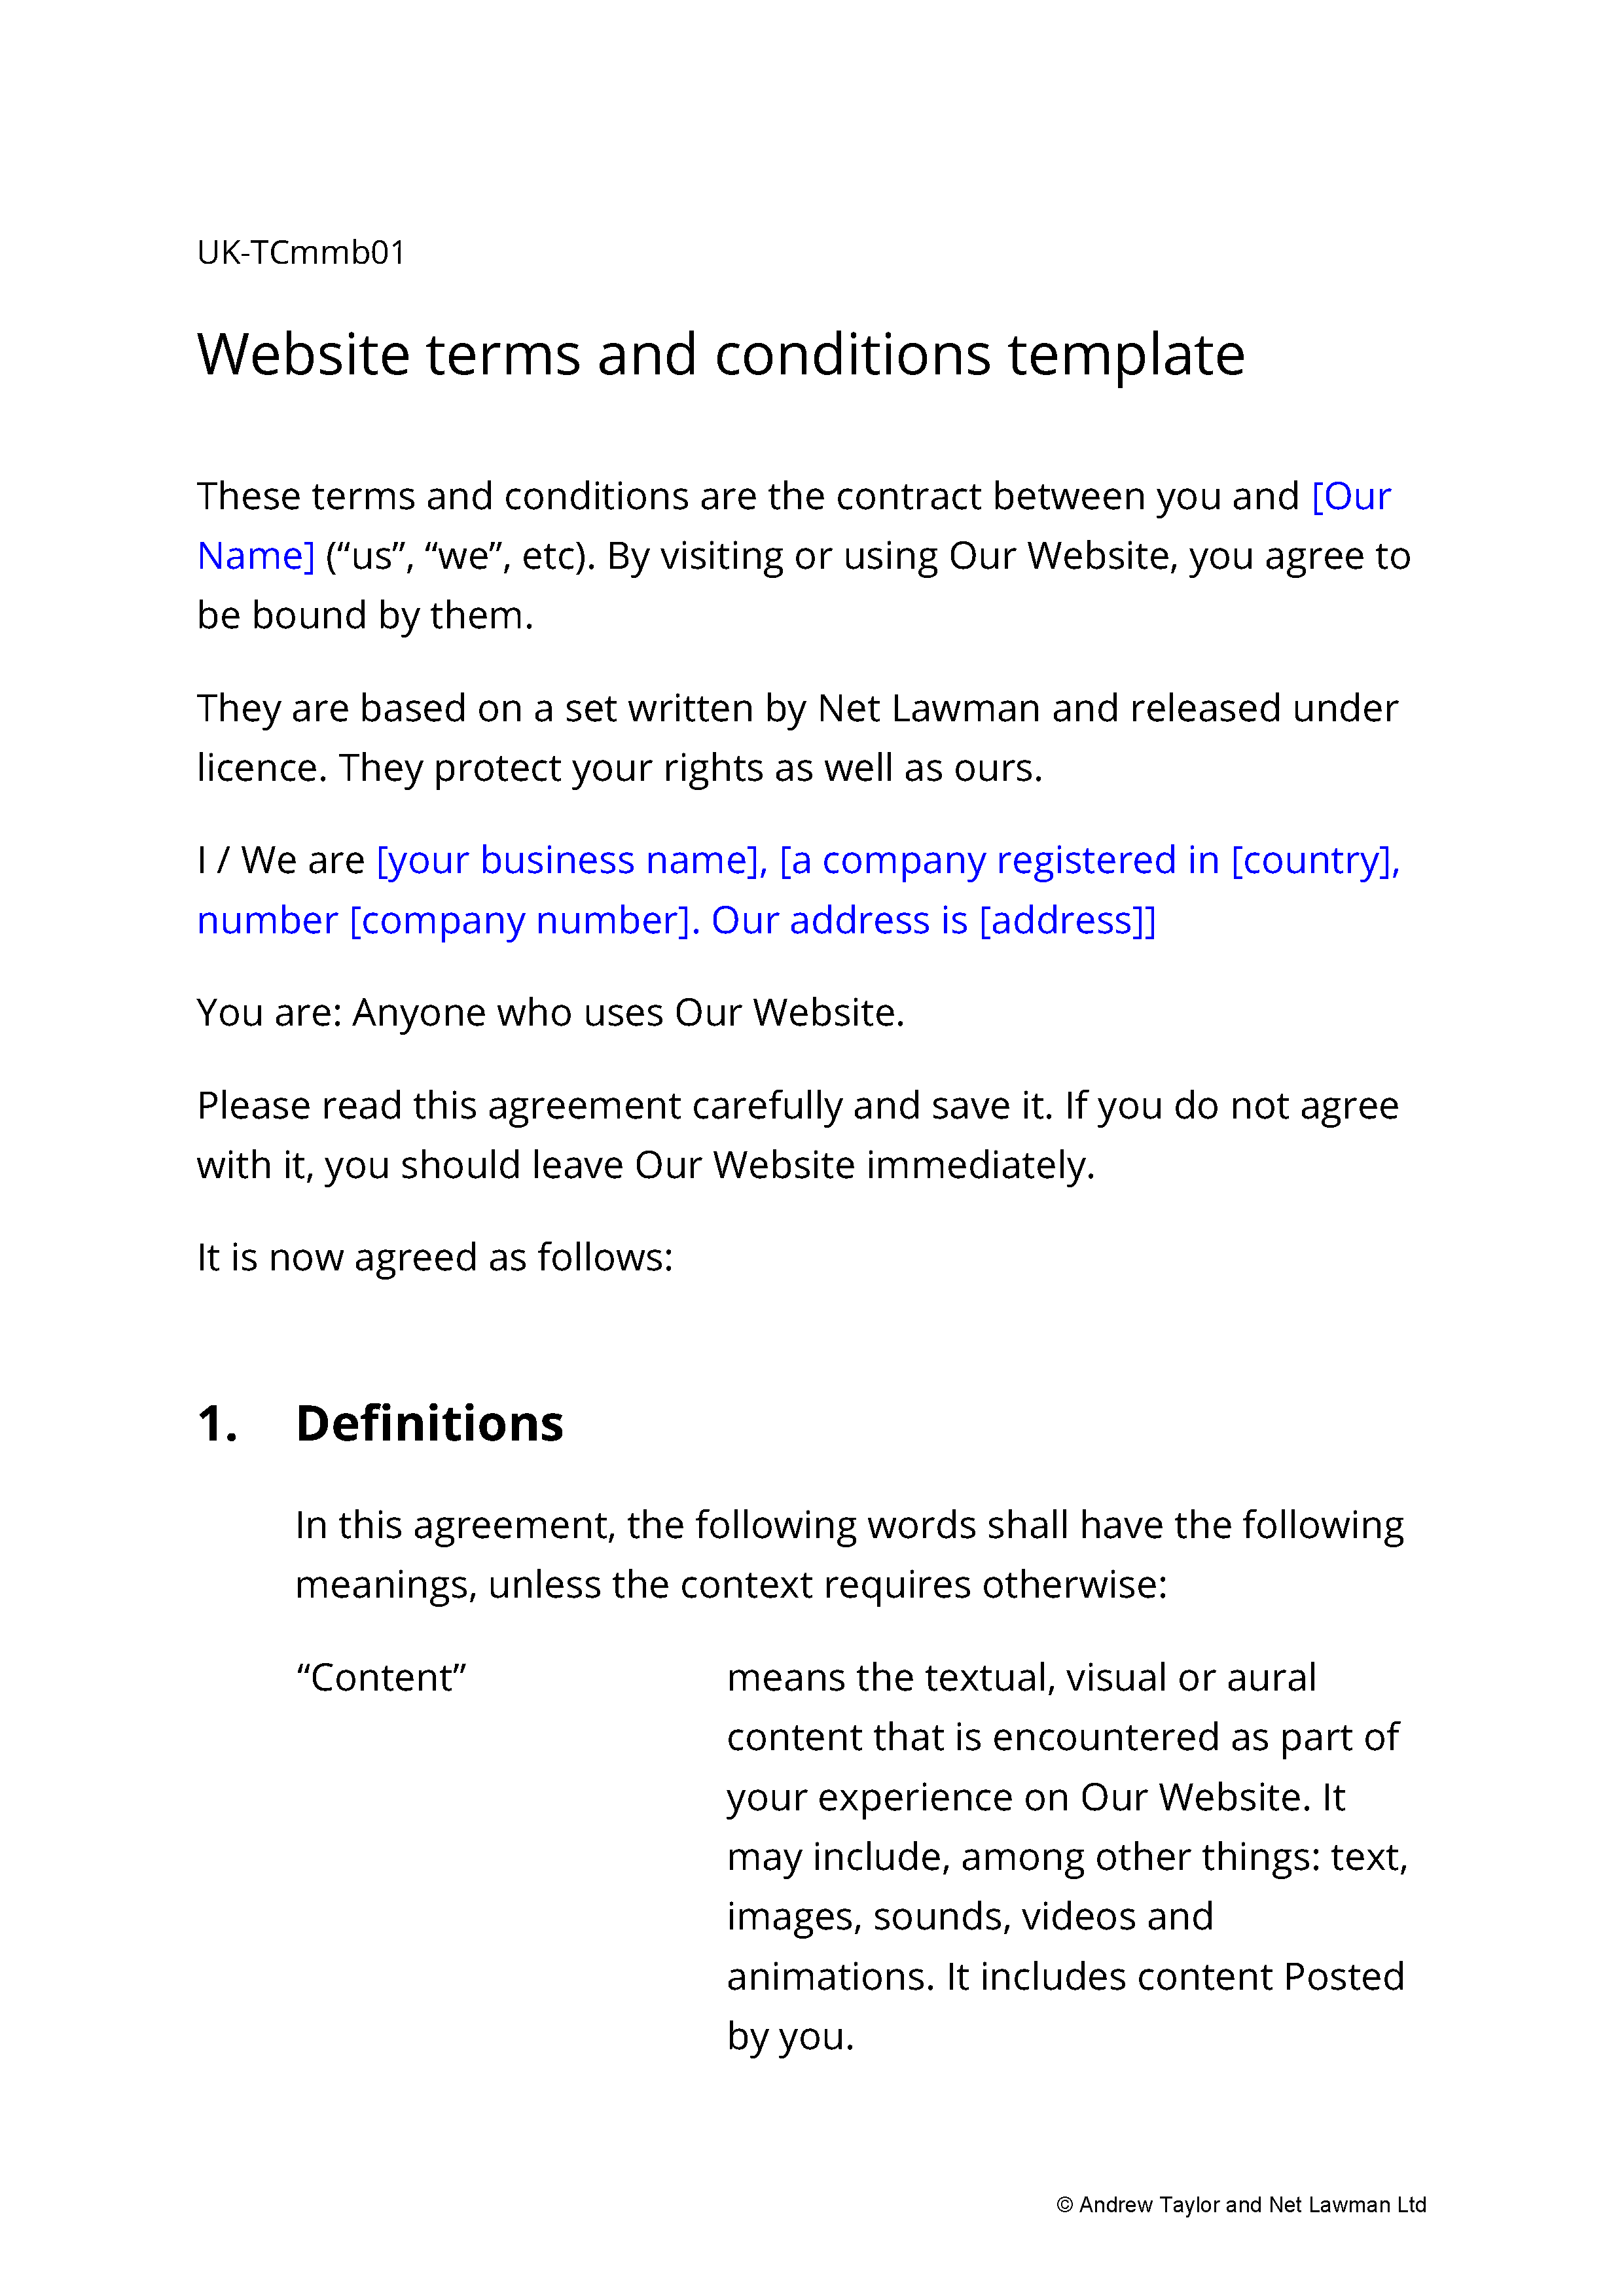 Sample page from the terms for a business member services website